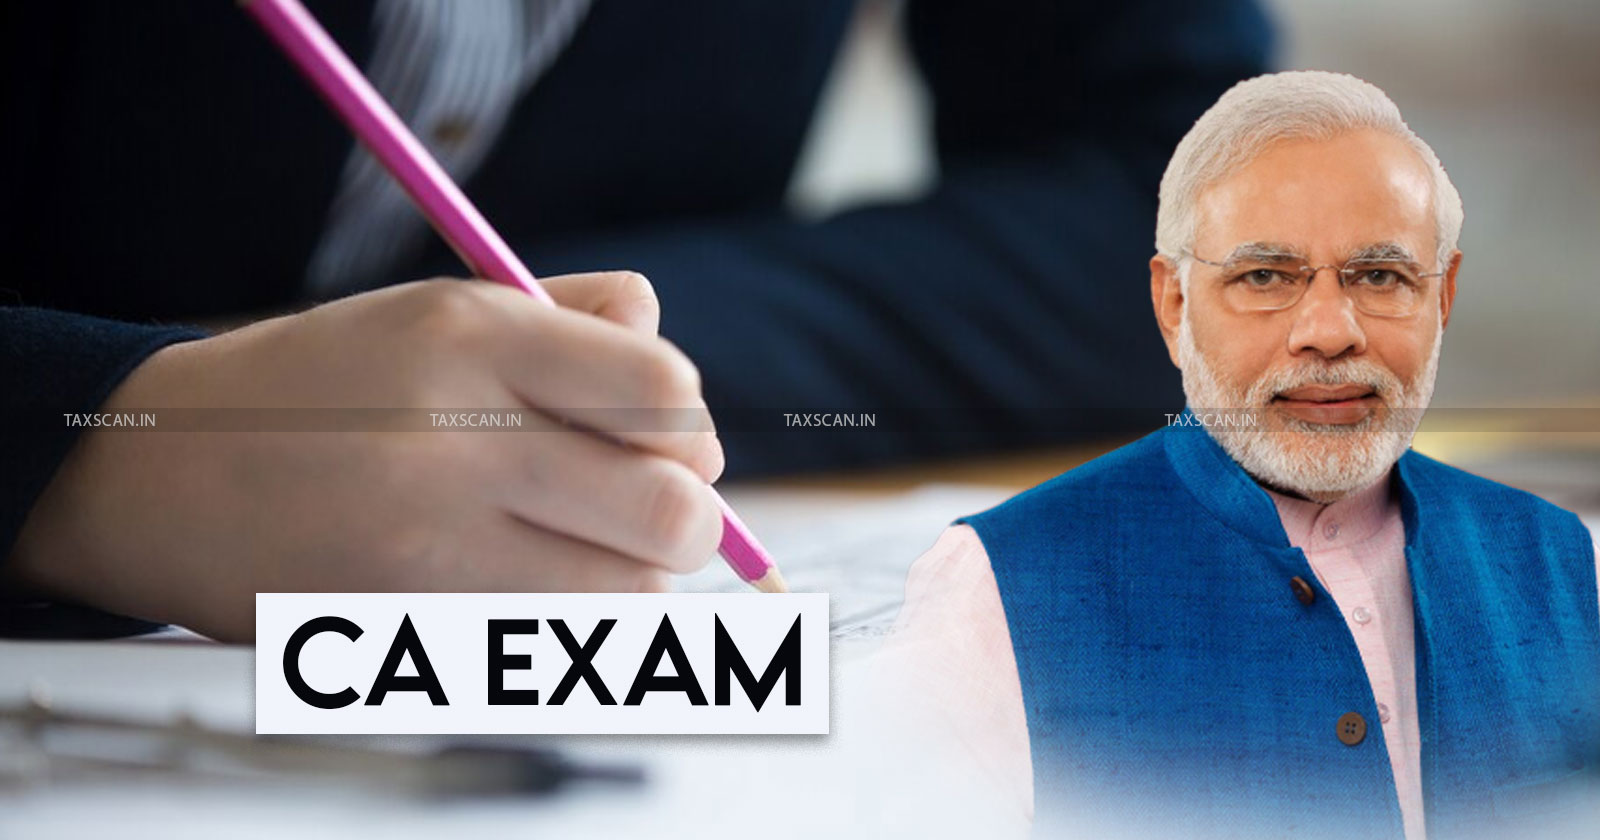 Chartered Accountant - Lok Sabha Election - Chartered Accountant writes Letter to PM - CA Exam Rescheduling - TAXSCAN